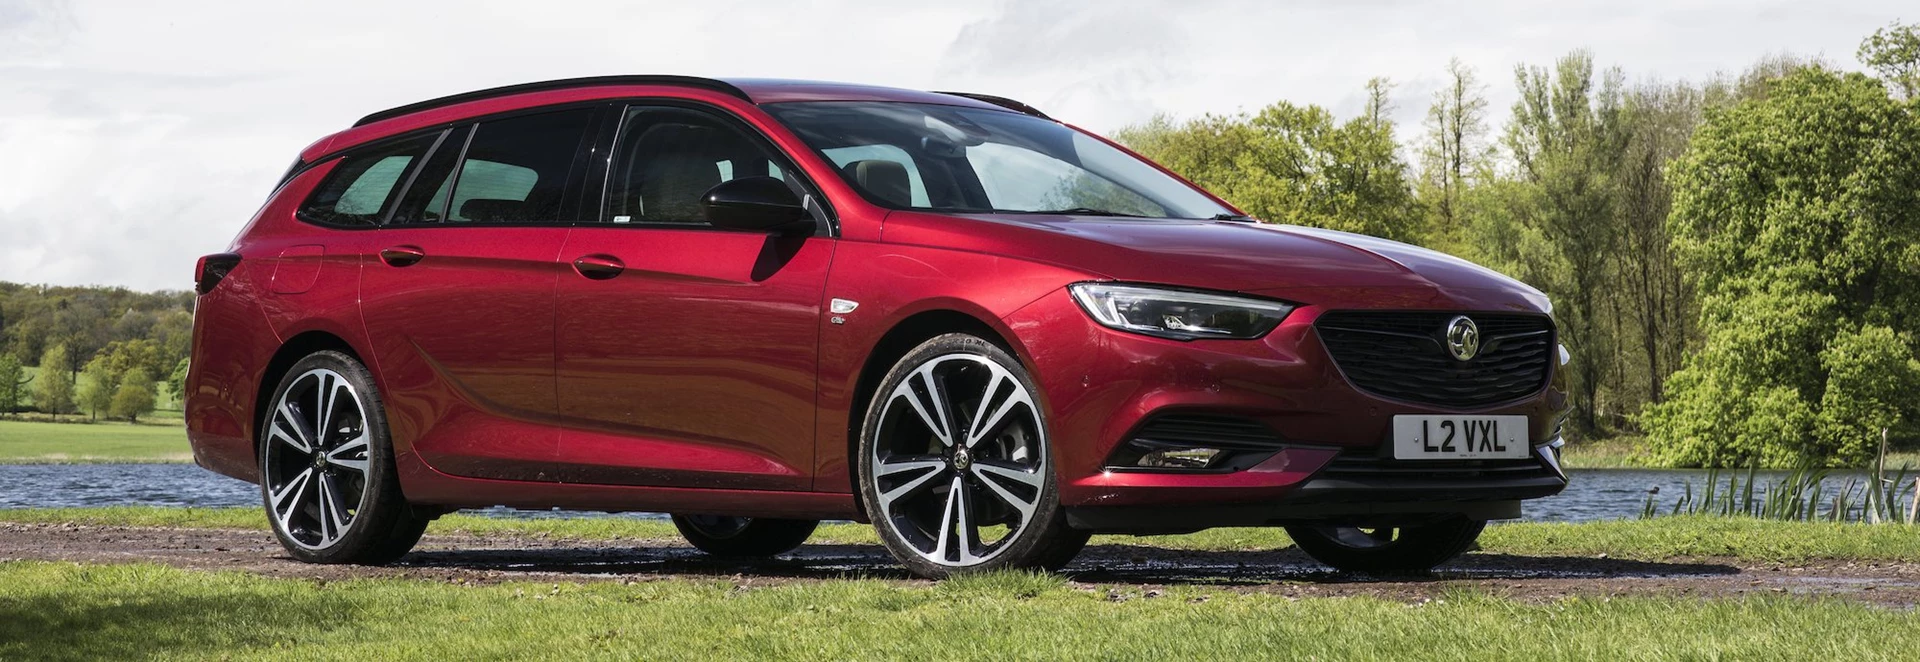 Successful first year for Vauxhall/Opel under PSA control